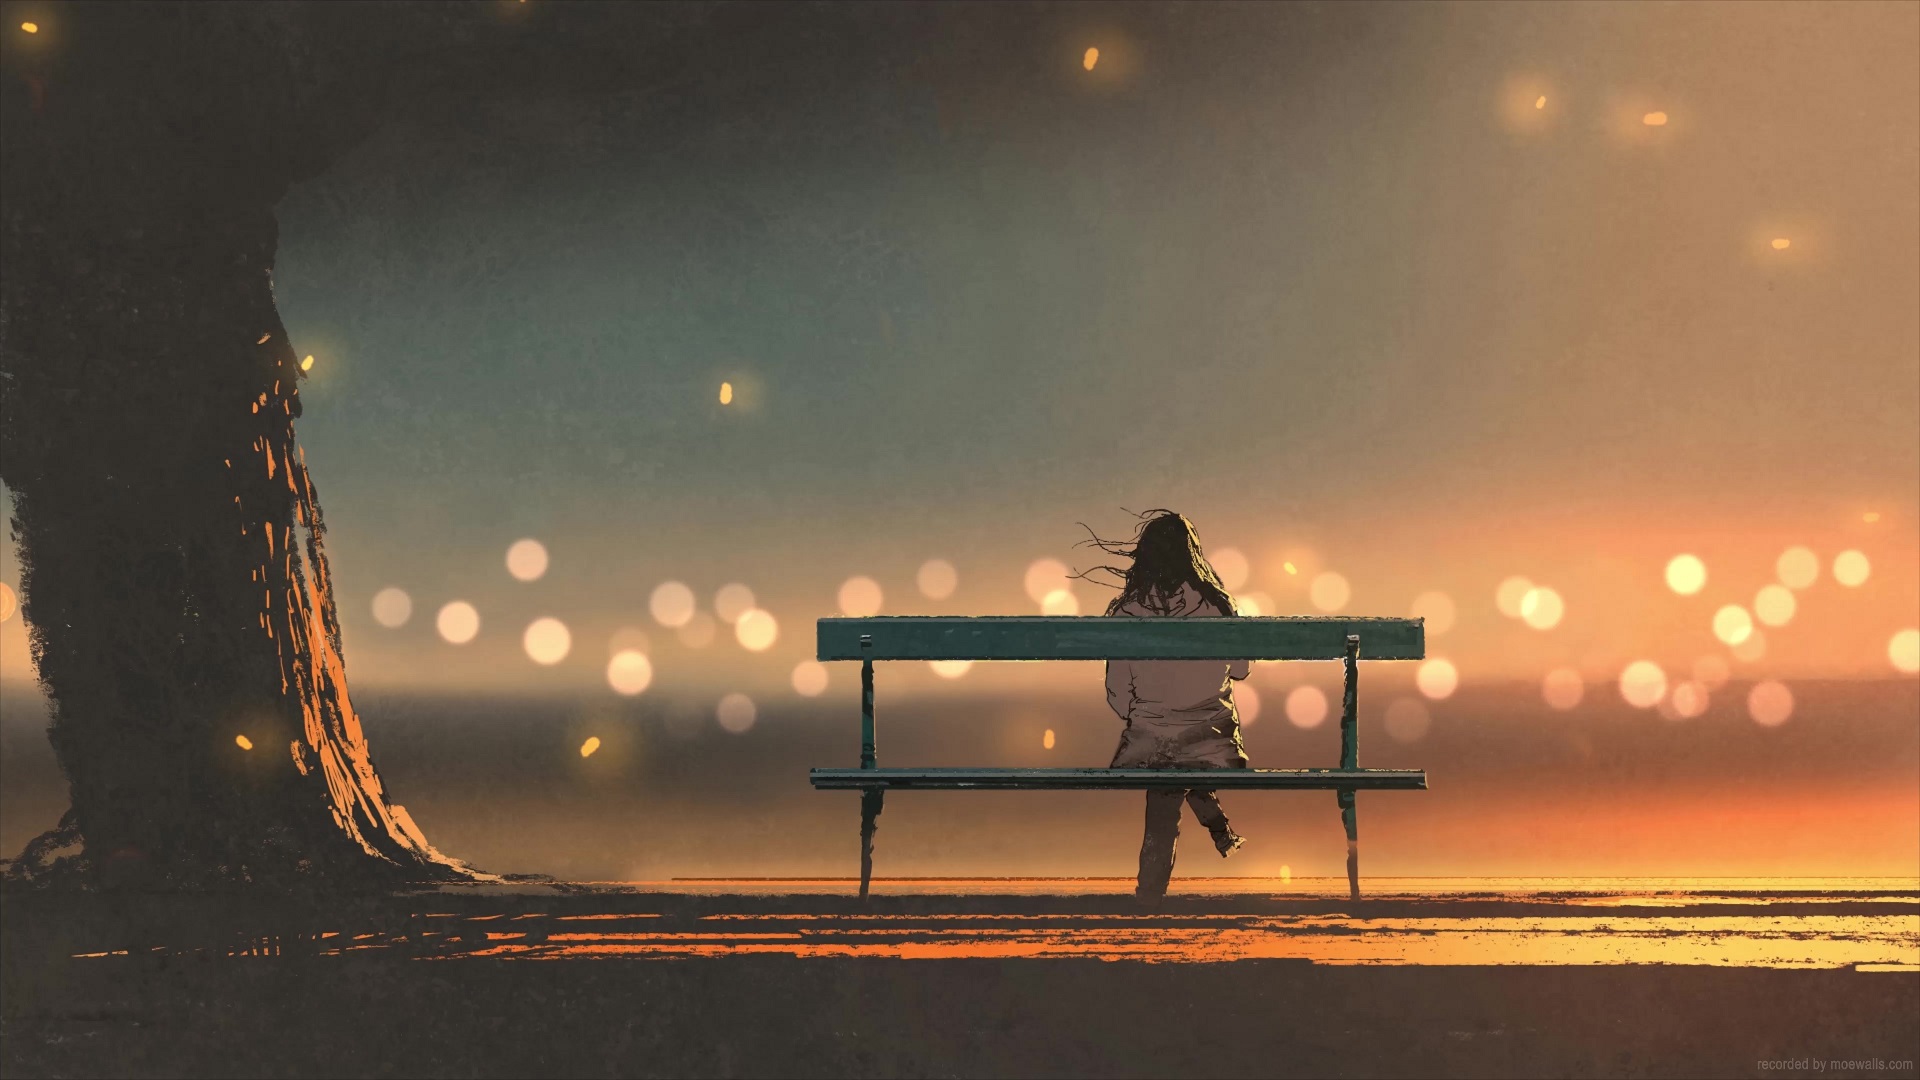 Lonely Anime Girl Sitting On The Bench Live Wallpaper - MoeWalls